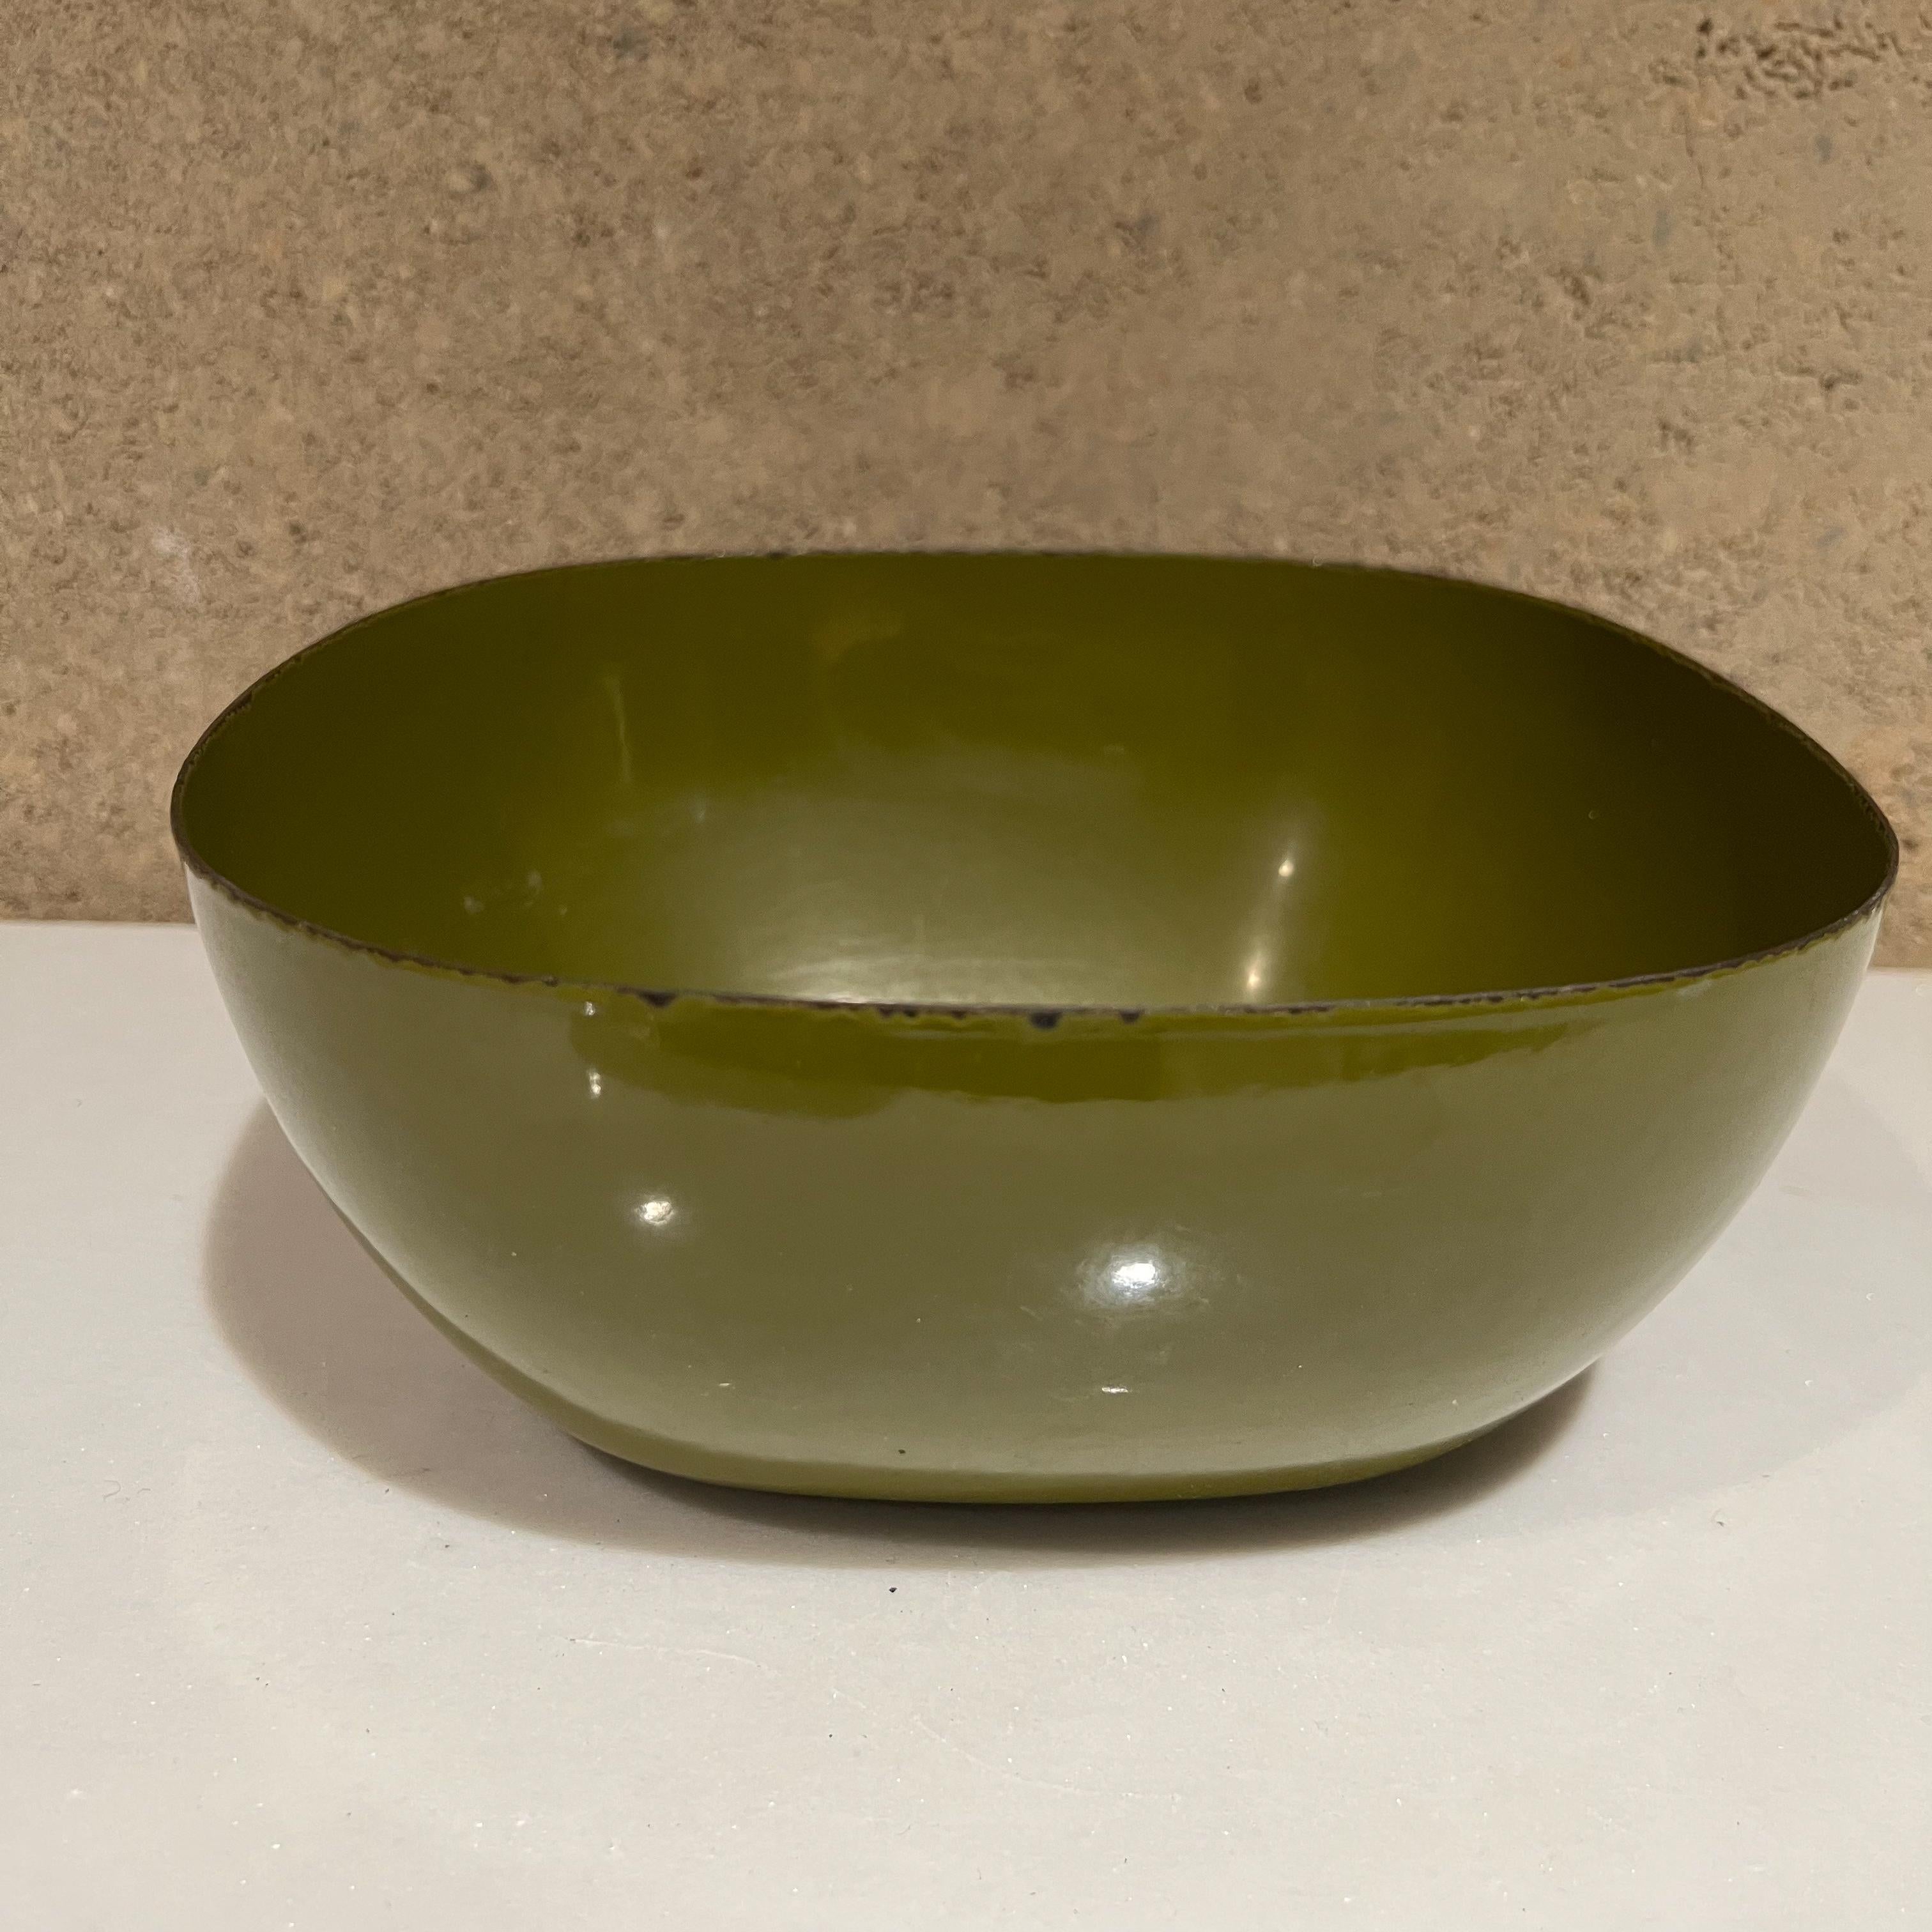 Mid-20th Century Vintage Avocado Green Enamelware Bowl 1960s Modern Cathrineholm of Holland For Sale